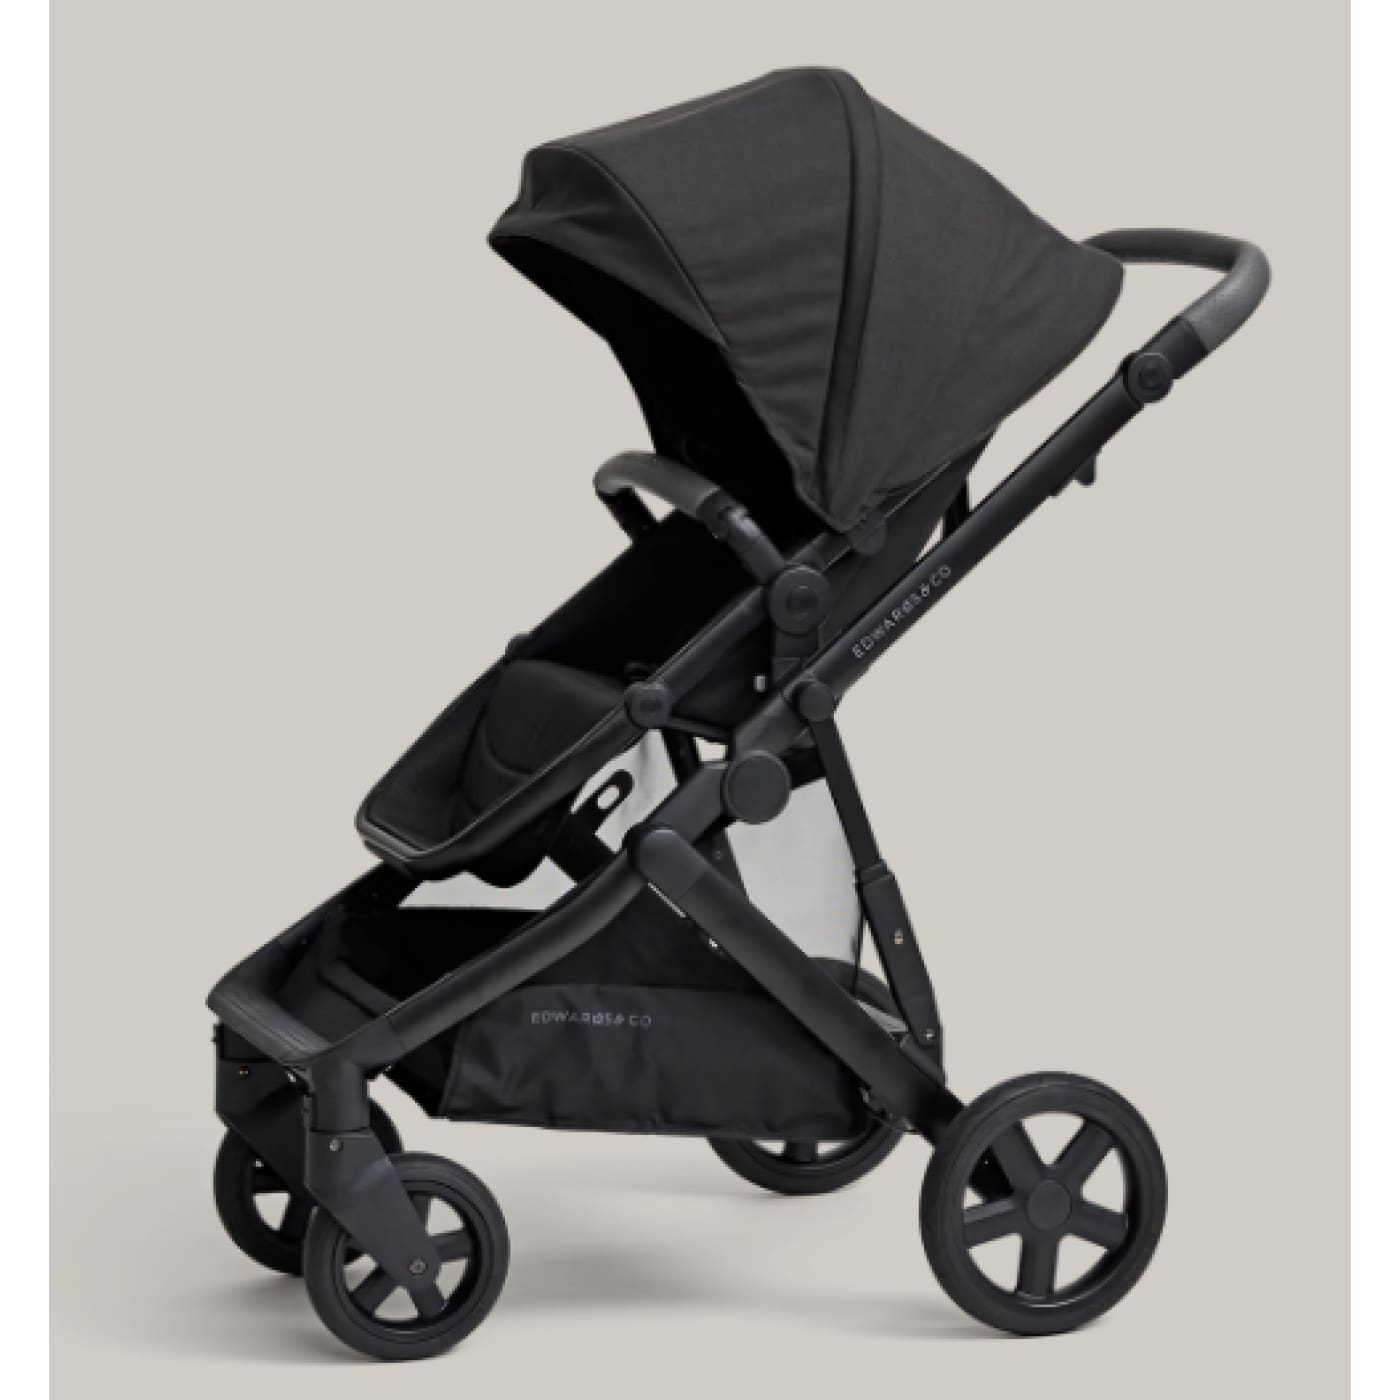 Edwards & Co Olive Stroller - Black Luxe - Black Luxe - PRAMS & STROLLERS - 4 WHEEL CONV TO 2/TSC